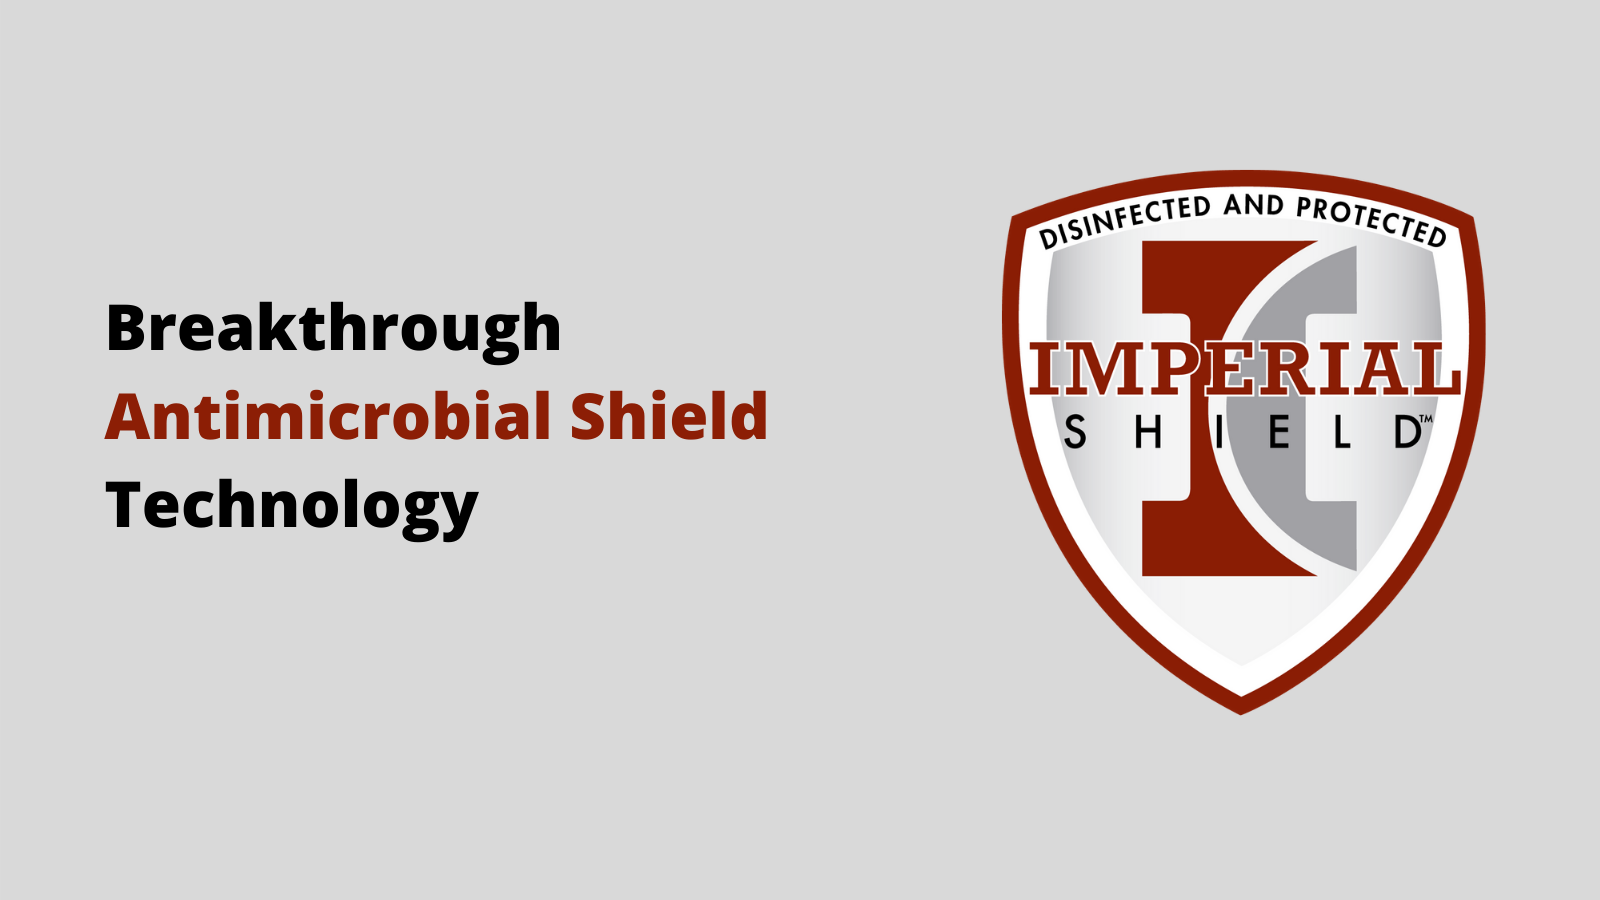 Imperial Shield Antimicrobial & Disinfectant Program